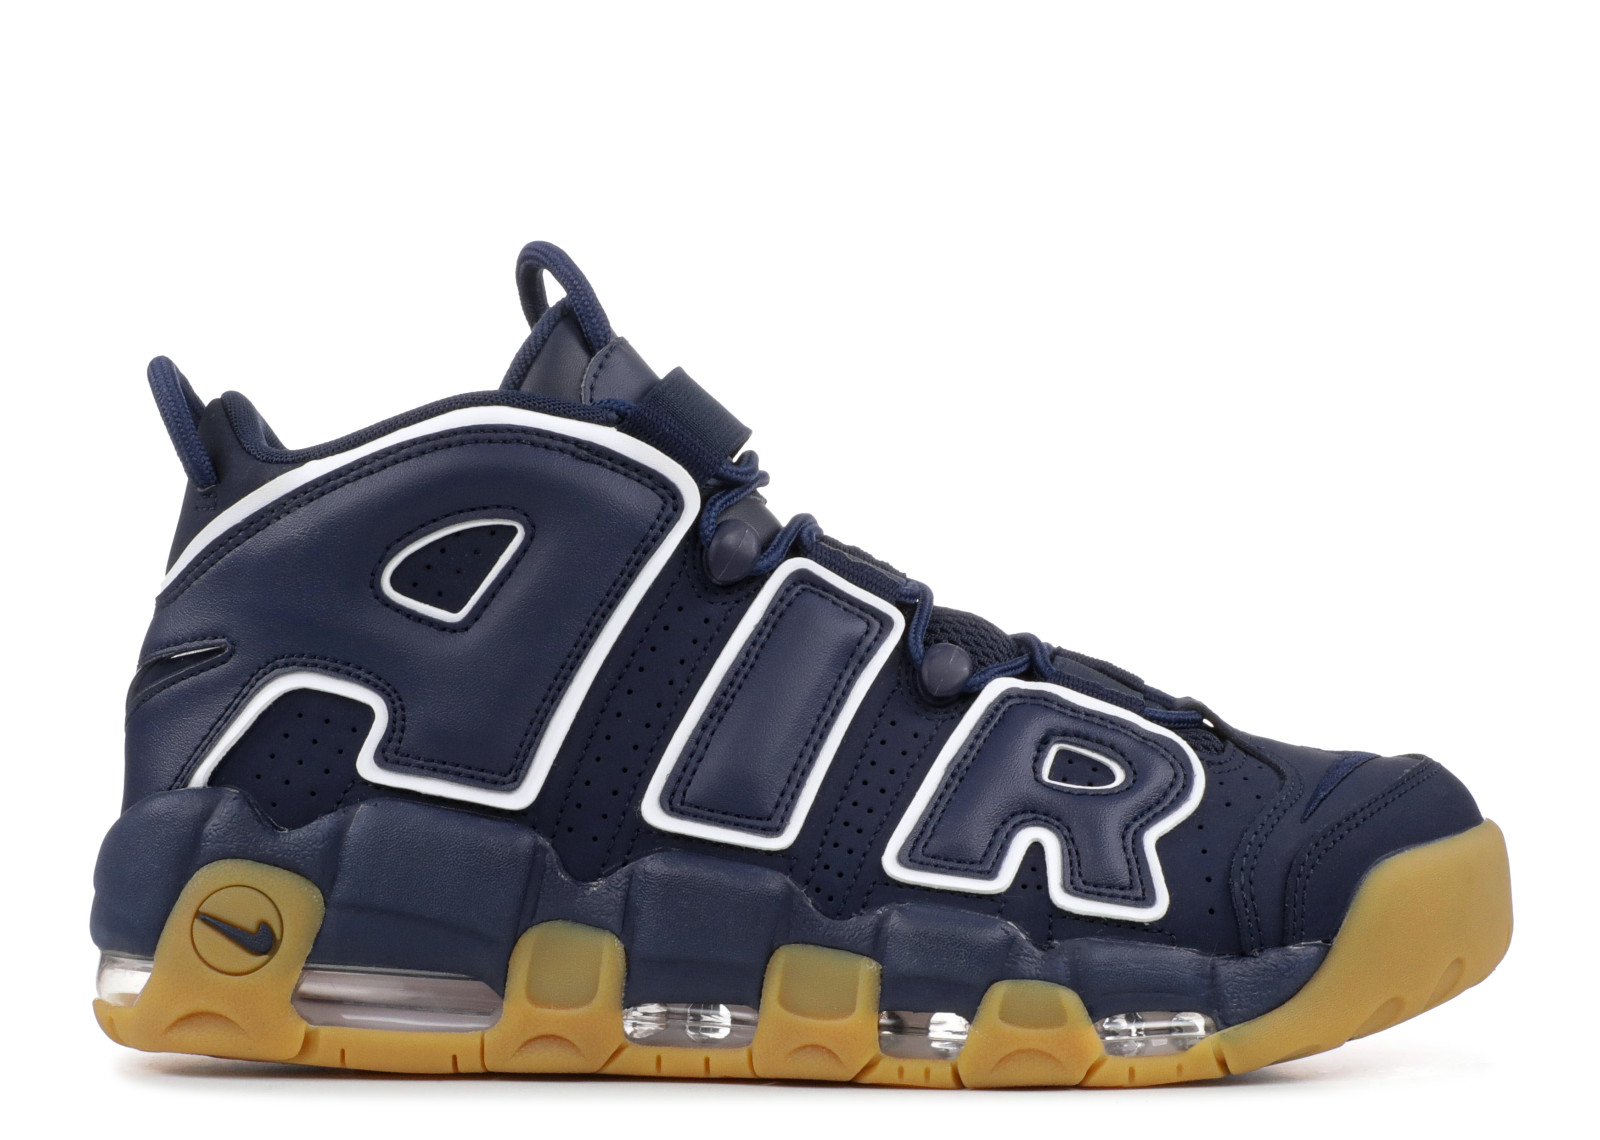 400A - Your budget only permits sneakers that sell for no more $70 - MultiscaleconsultingShops - Nike Air More Uptempo Basketball Unisex Shoes Obsidian White Gum 921948